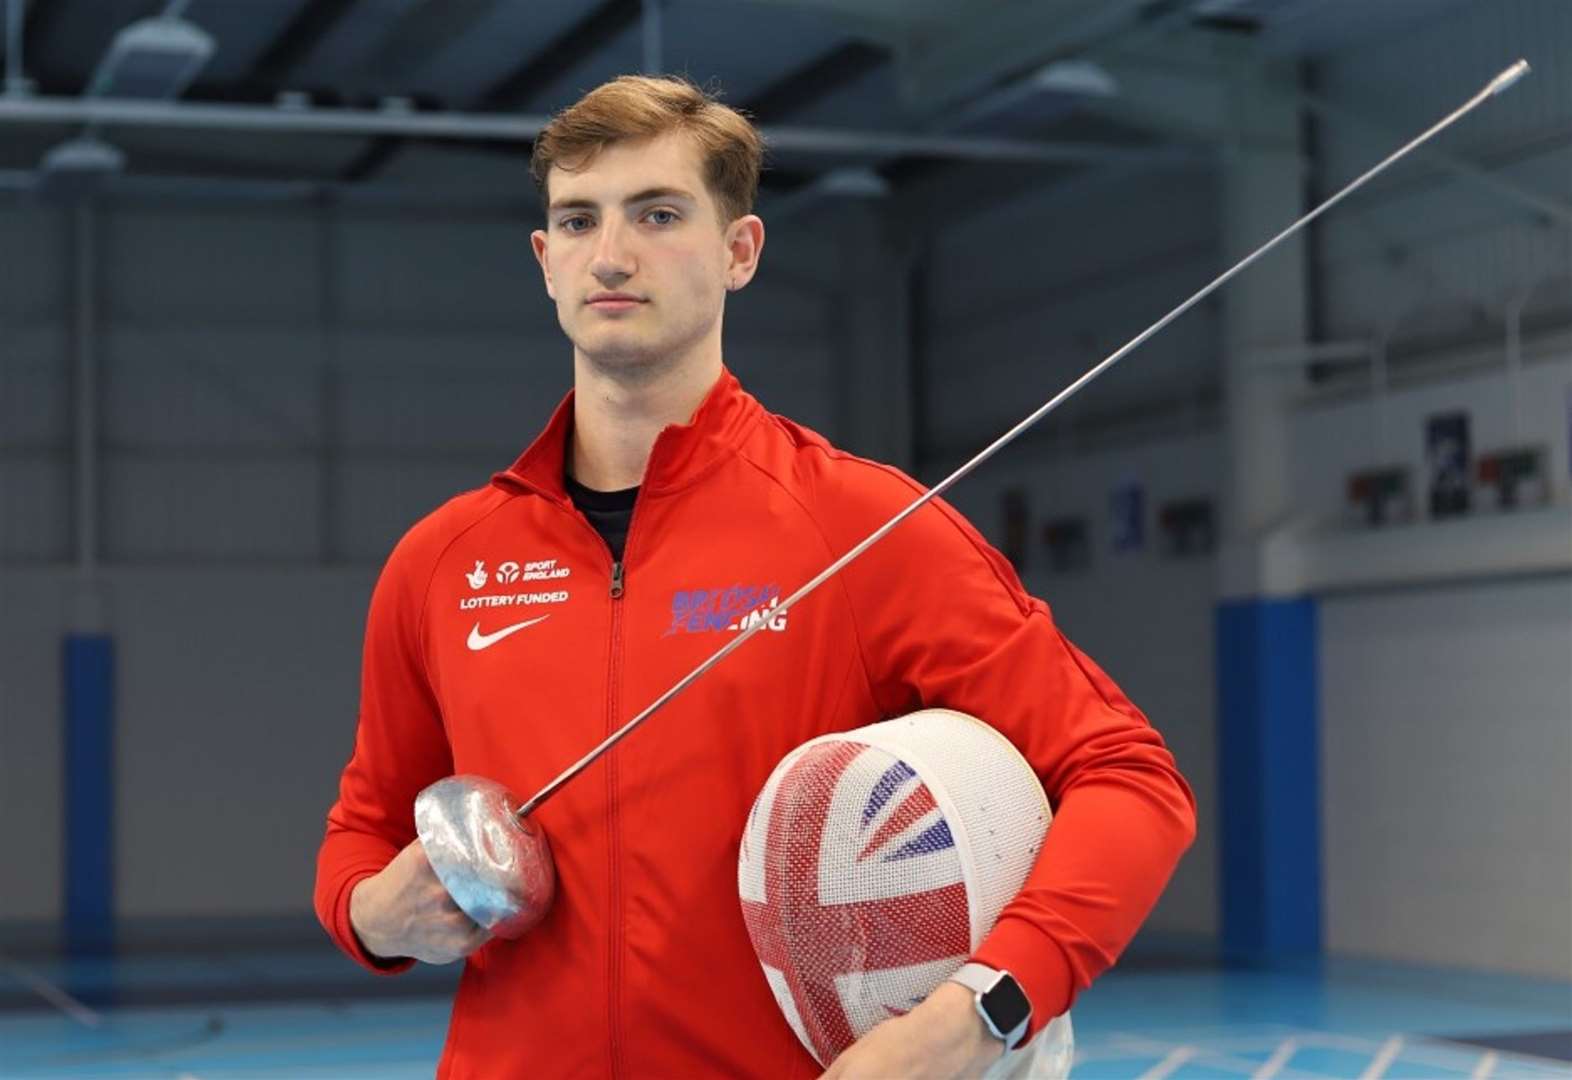 Canterbury fencing star William East pays tribute to coach ahead of World University Games